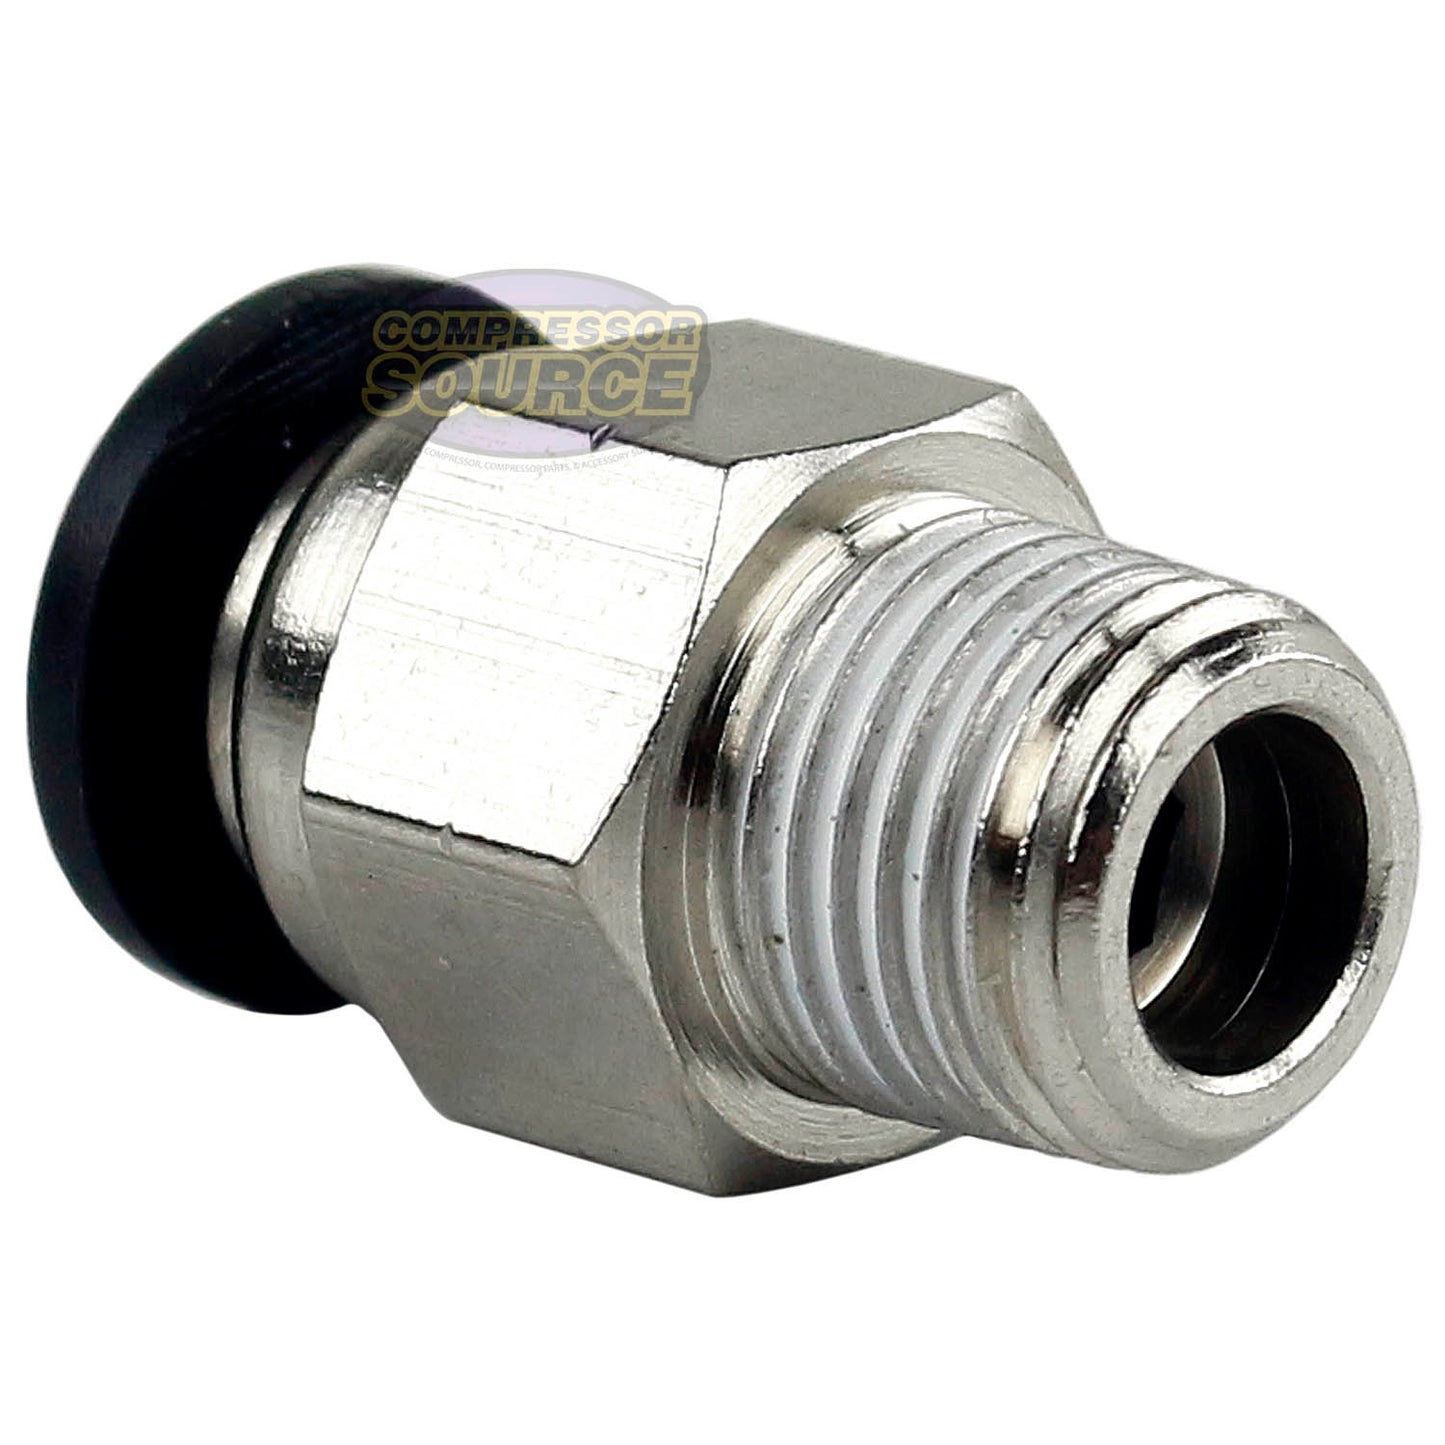 20 Pack 1/8" Male NPT x 1/4 OD Tube Female Push In To Lock Connect Straight Fitting Prevost RPDMR4120